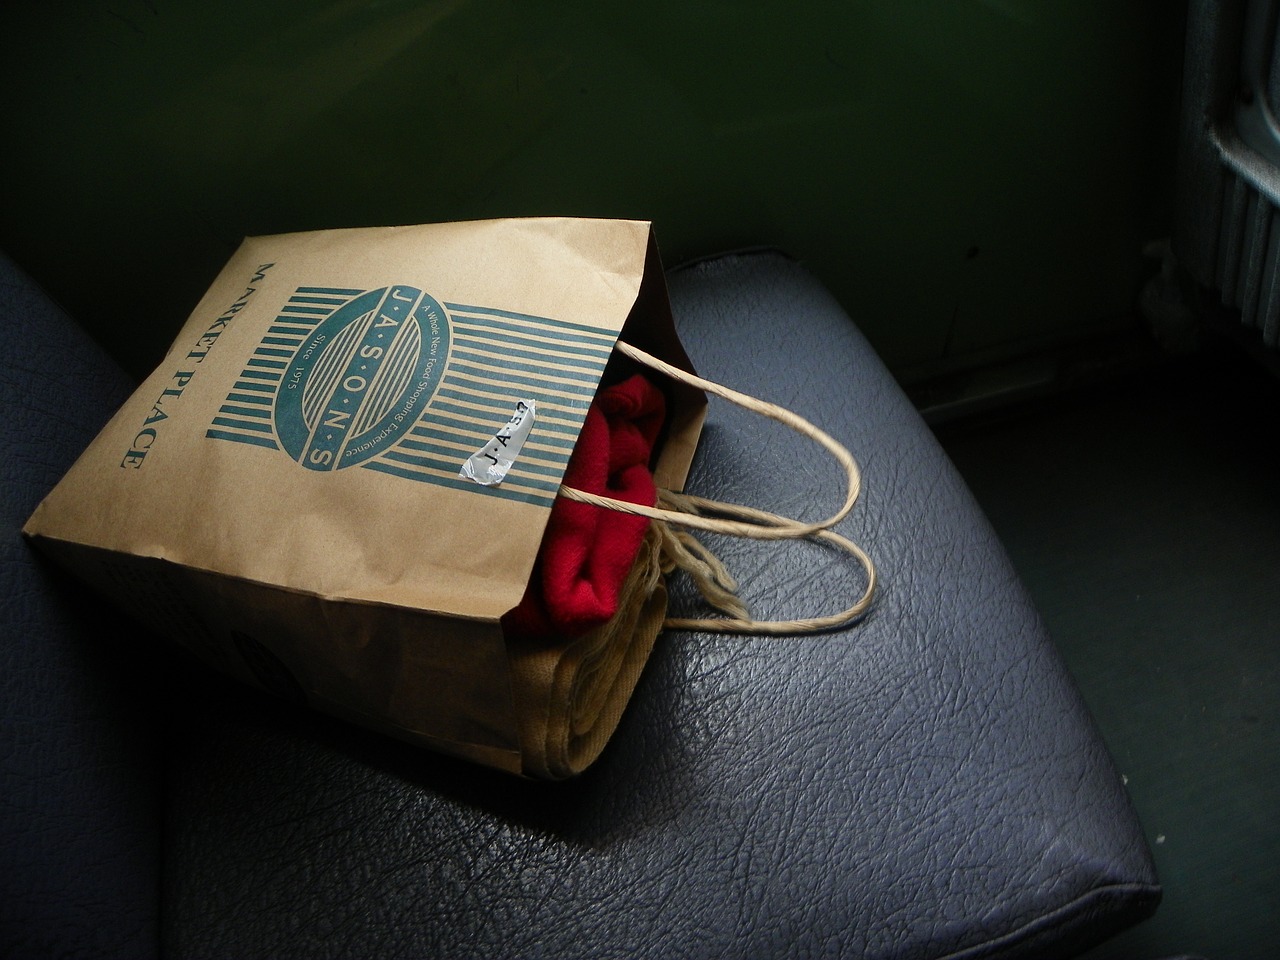 public cars paper bags travel free photo